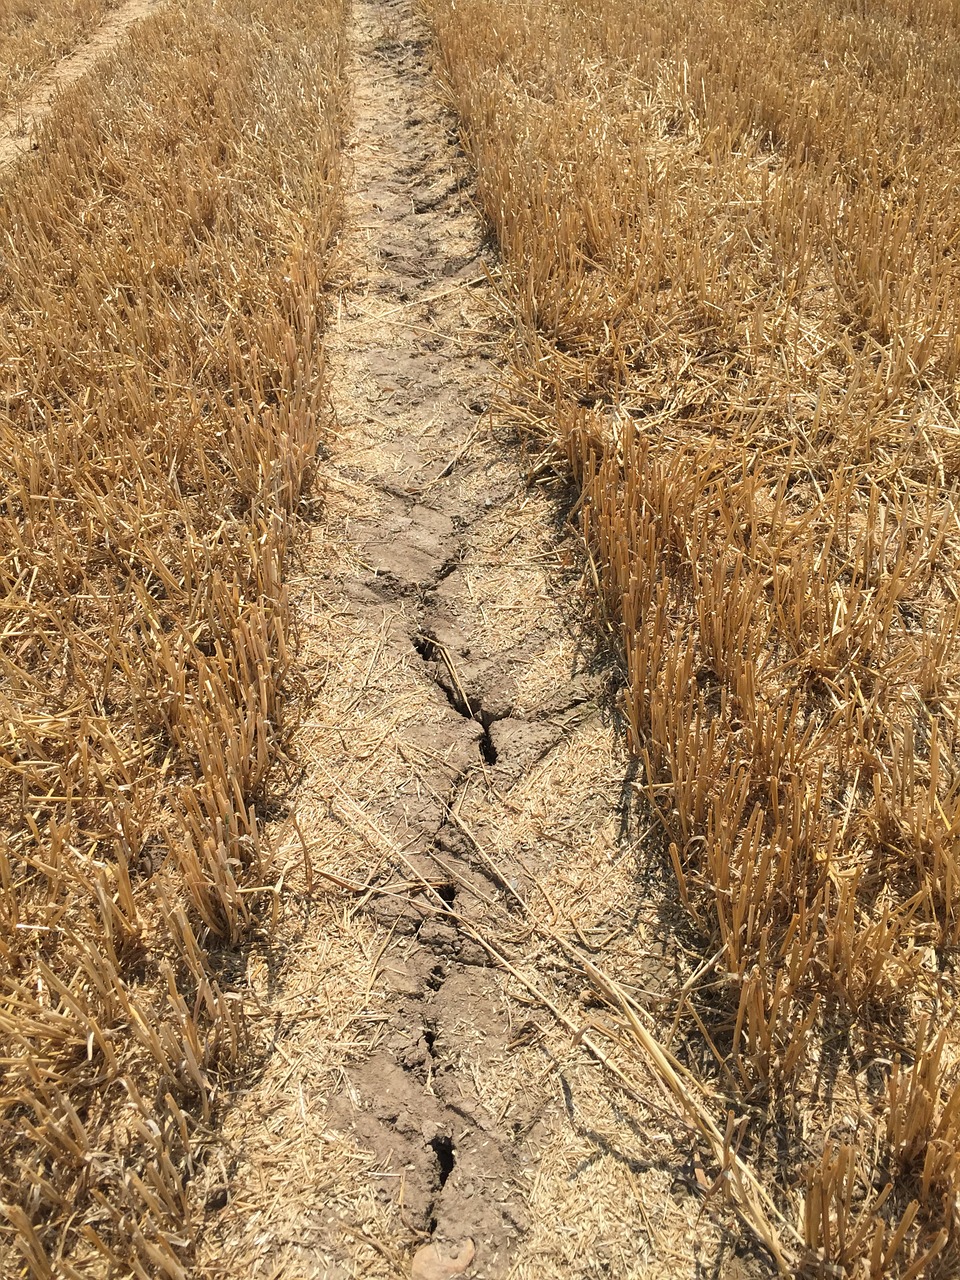 dry drought field free photo